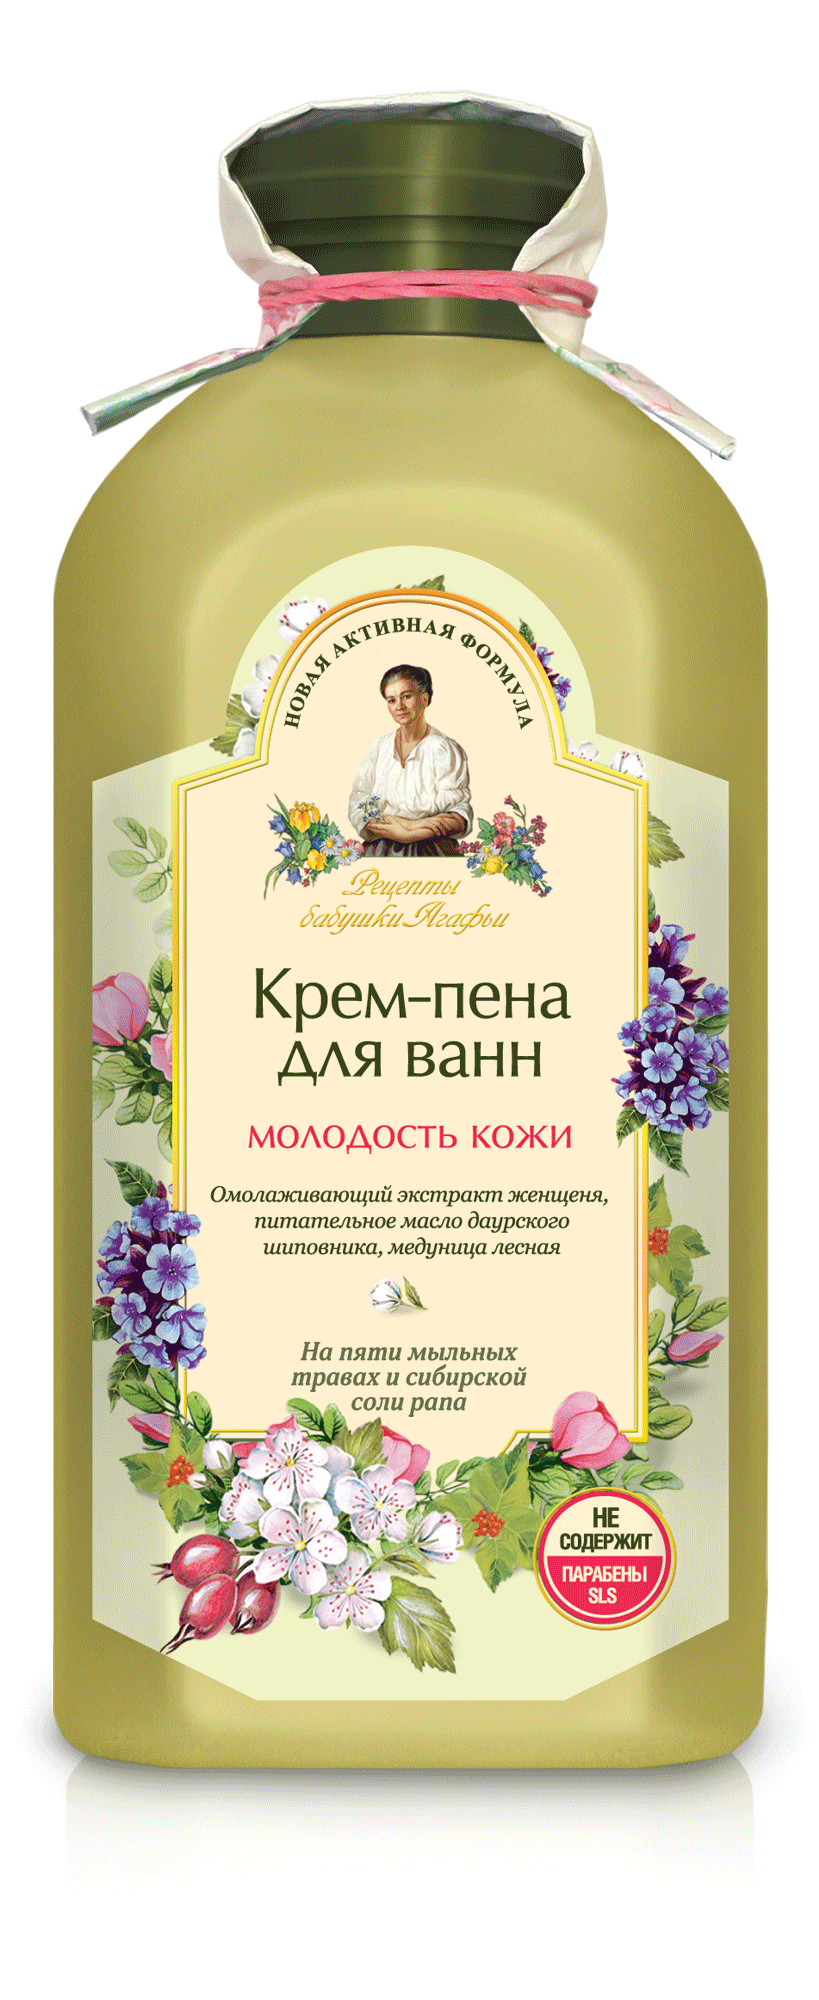 Cream-Bubble Baths "Anti-Age" with 5 Herbs, Siberian Salt, Ginseng, Lungwort Extracts, Rosehip Oil 500 ml